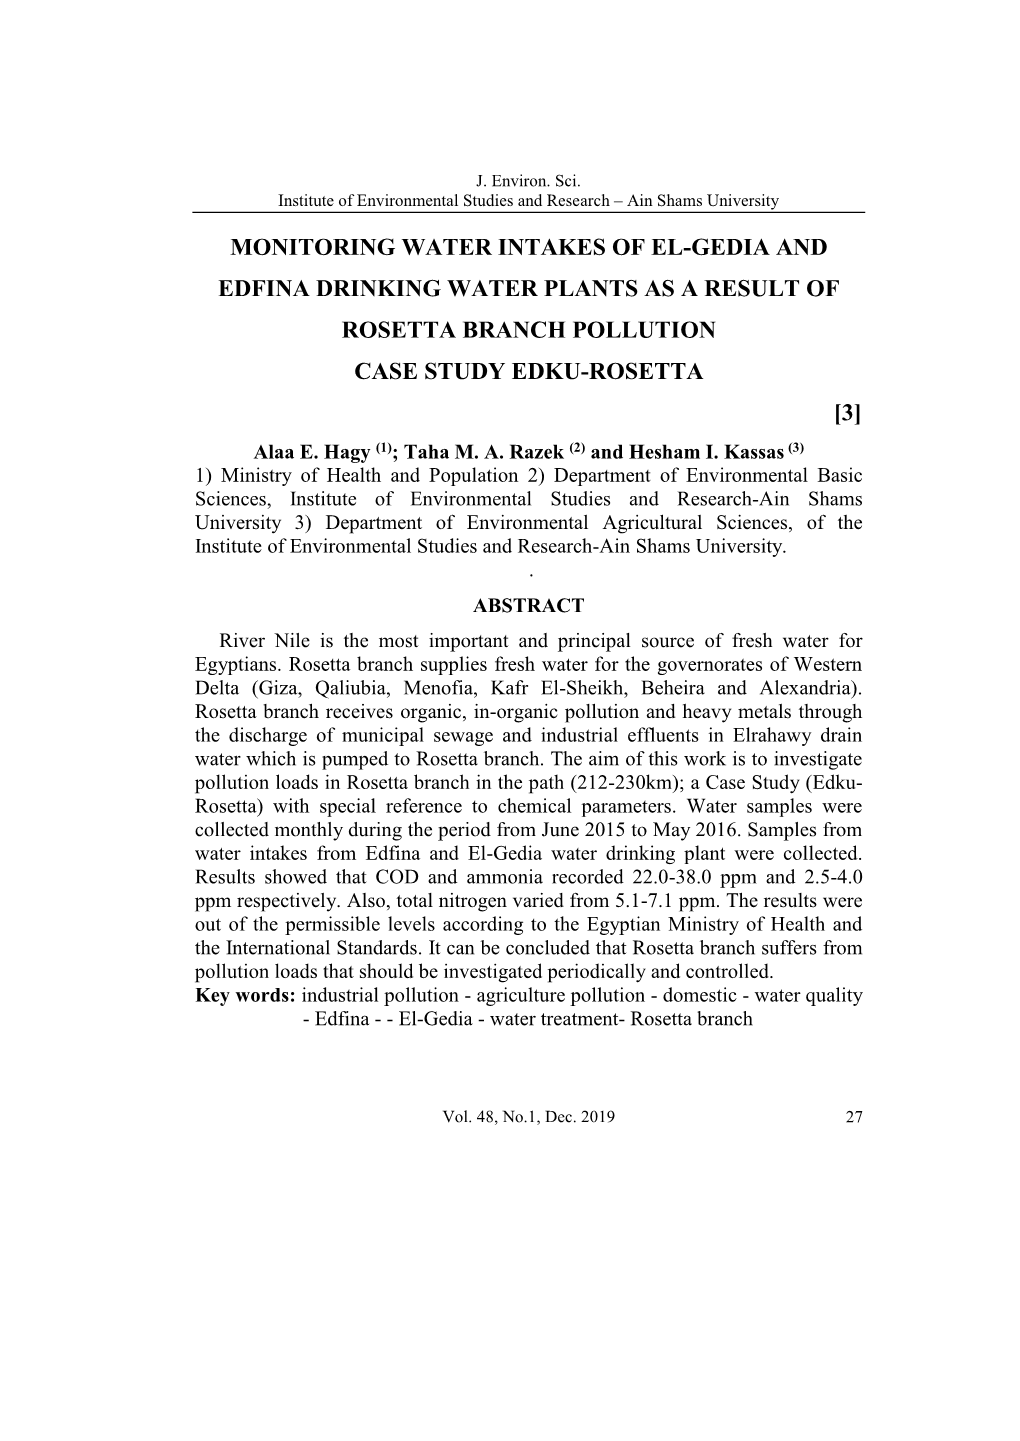 MONITORING WATER INTAKES of EL-GEDIA and EDFINA DRINKING WATER PLANTS AS a RESULT of ROSETTA BRANCH POLLUTION CASE STUDY EDKU-ROSETTA [3] Alaa E